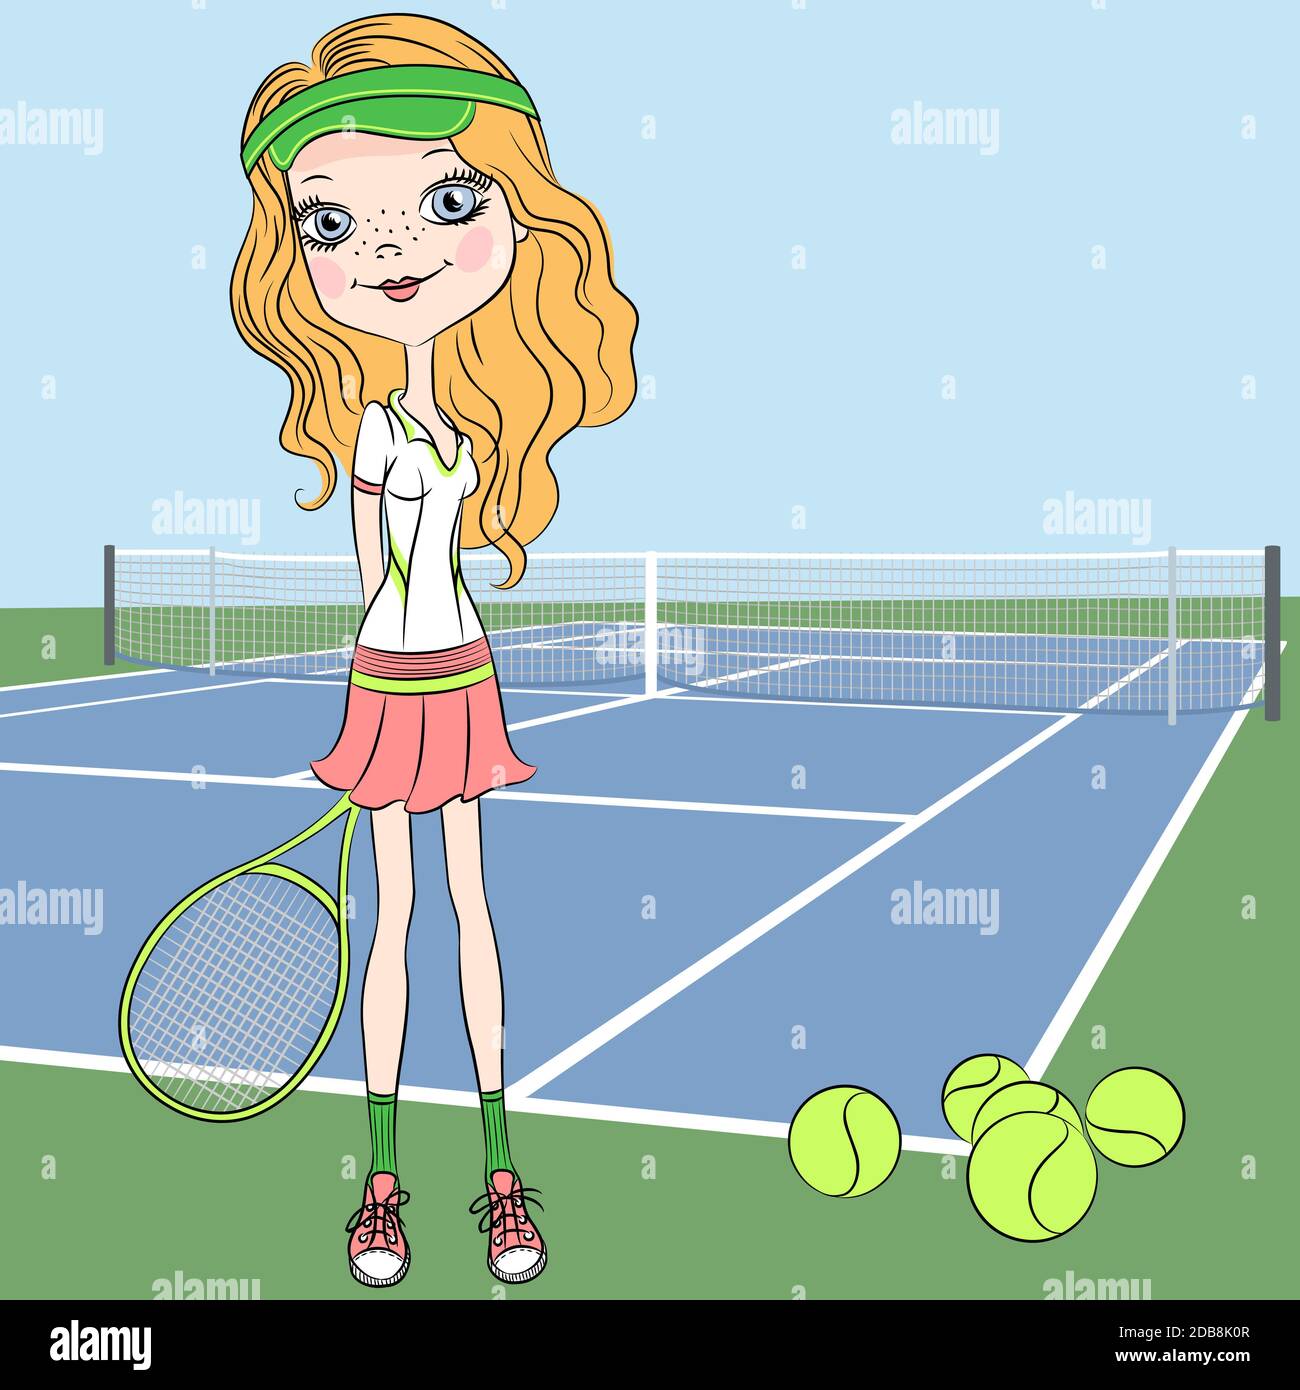 young girl Tennis player on the Tennis court with racquet Stock Photo